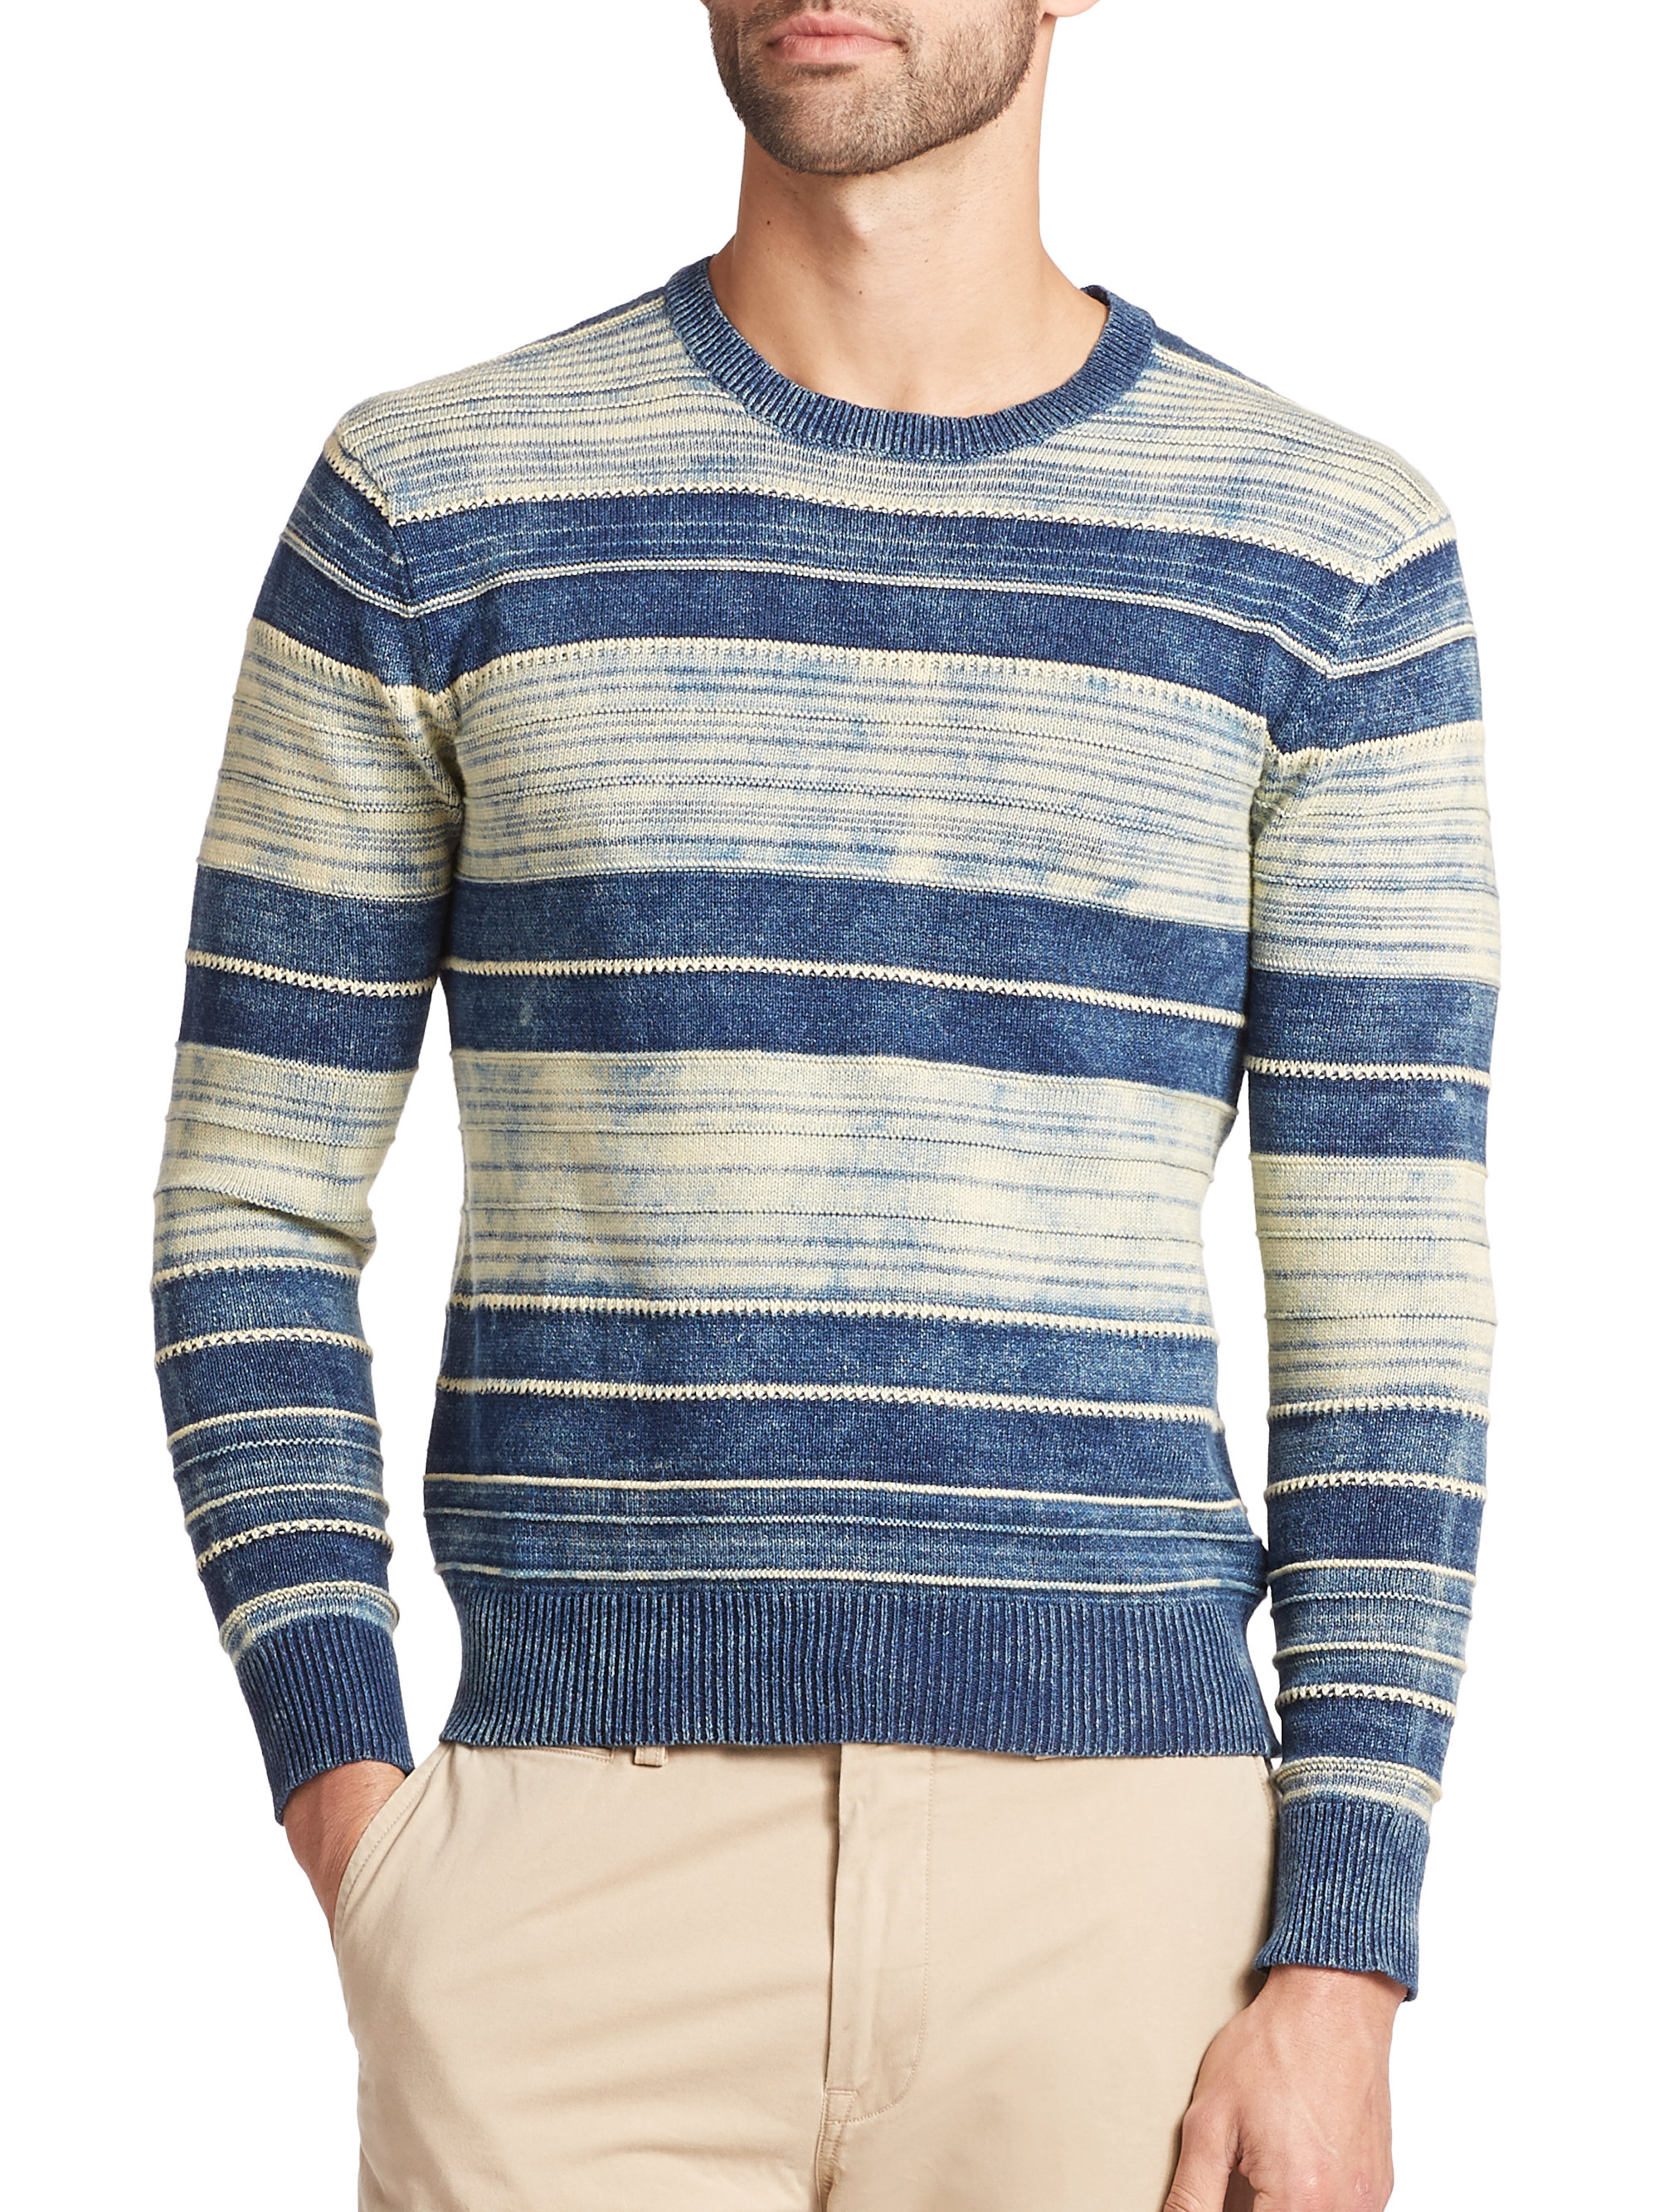 Polo ralph lauren Indigo-dyed Cotton Sweater in Blue for Men | Lyst